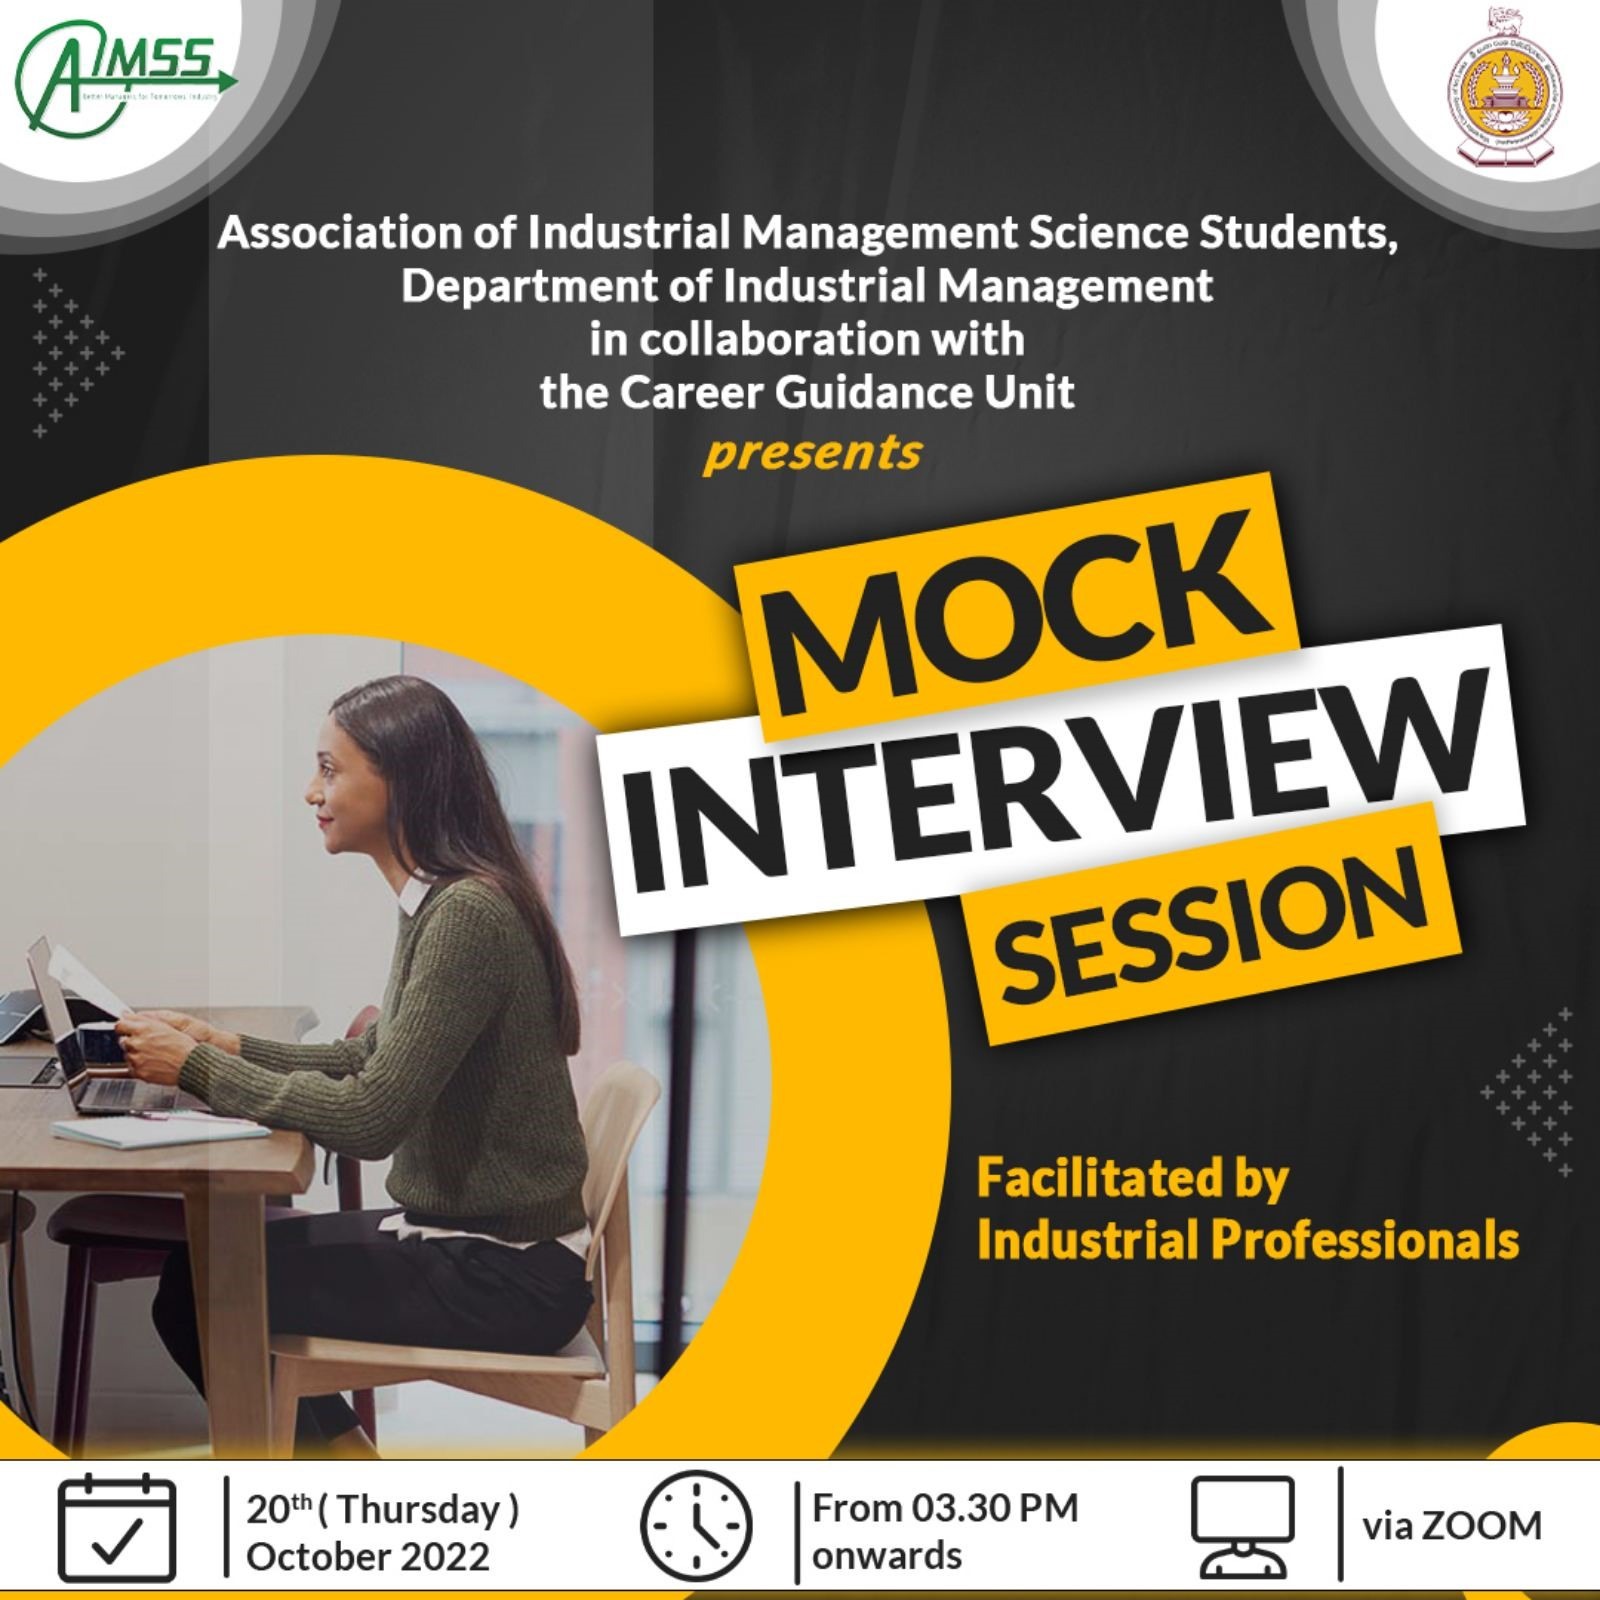 The Mock Interview Session Organized By The Association Of Industrial Management Science 